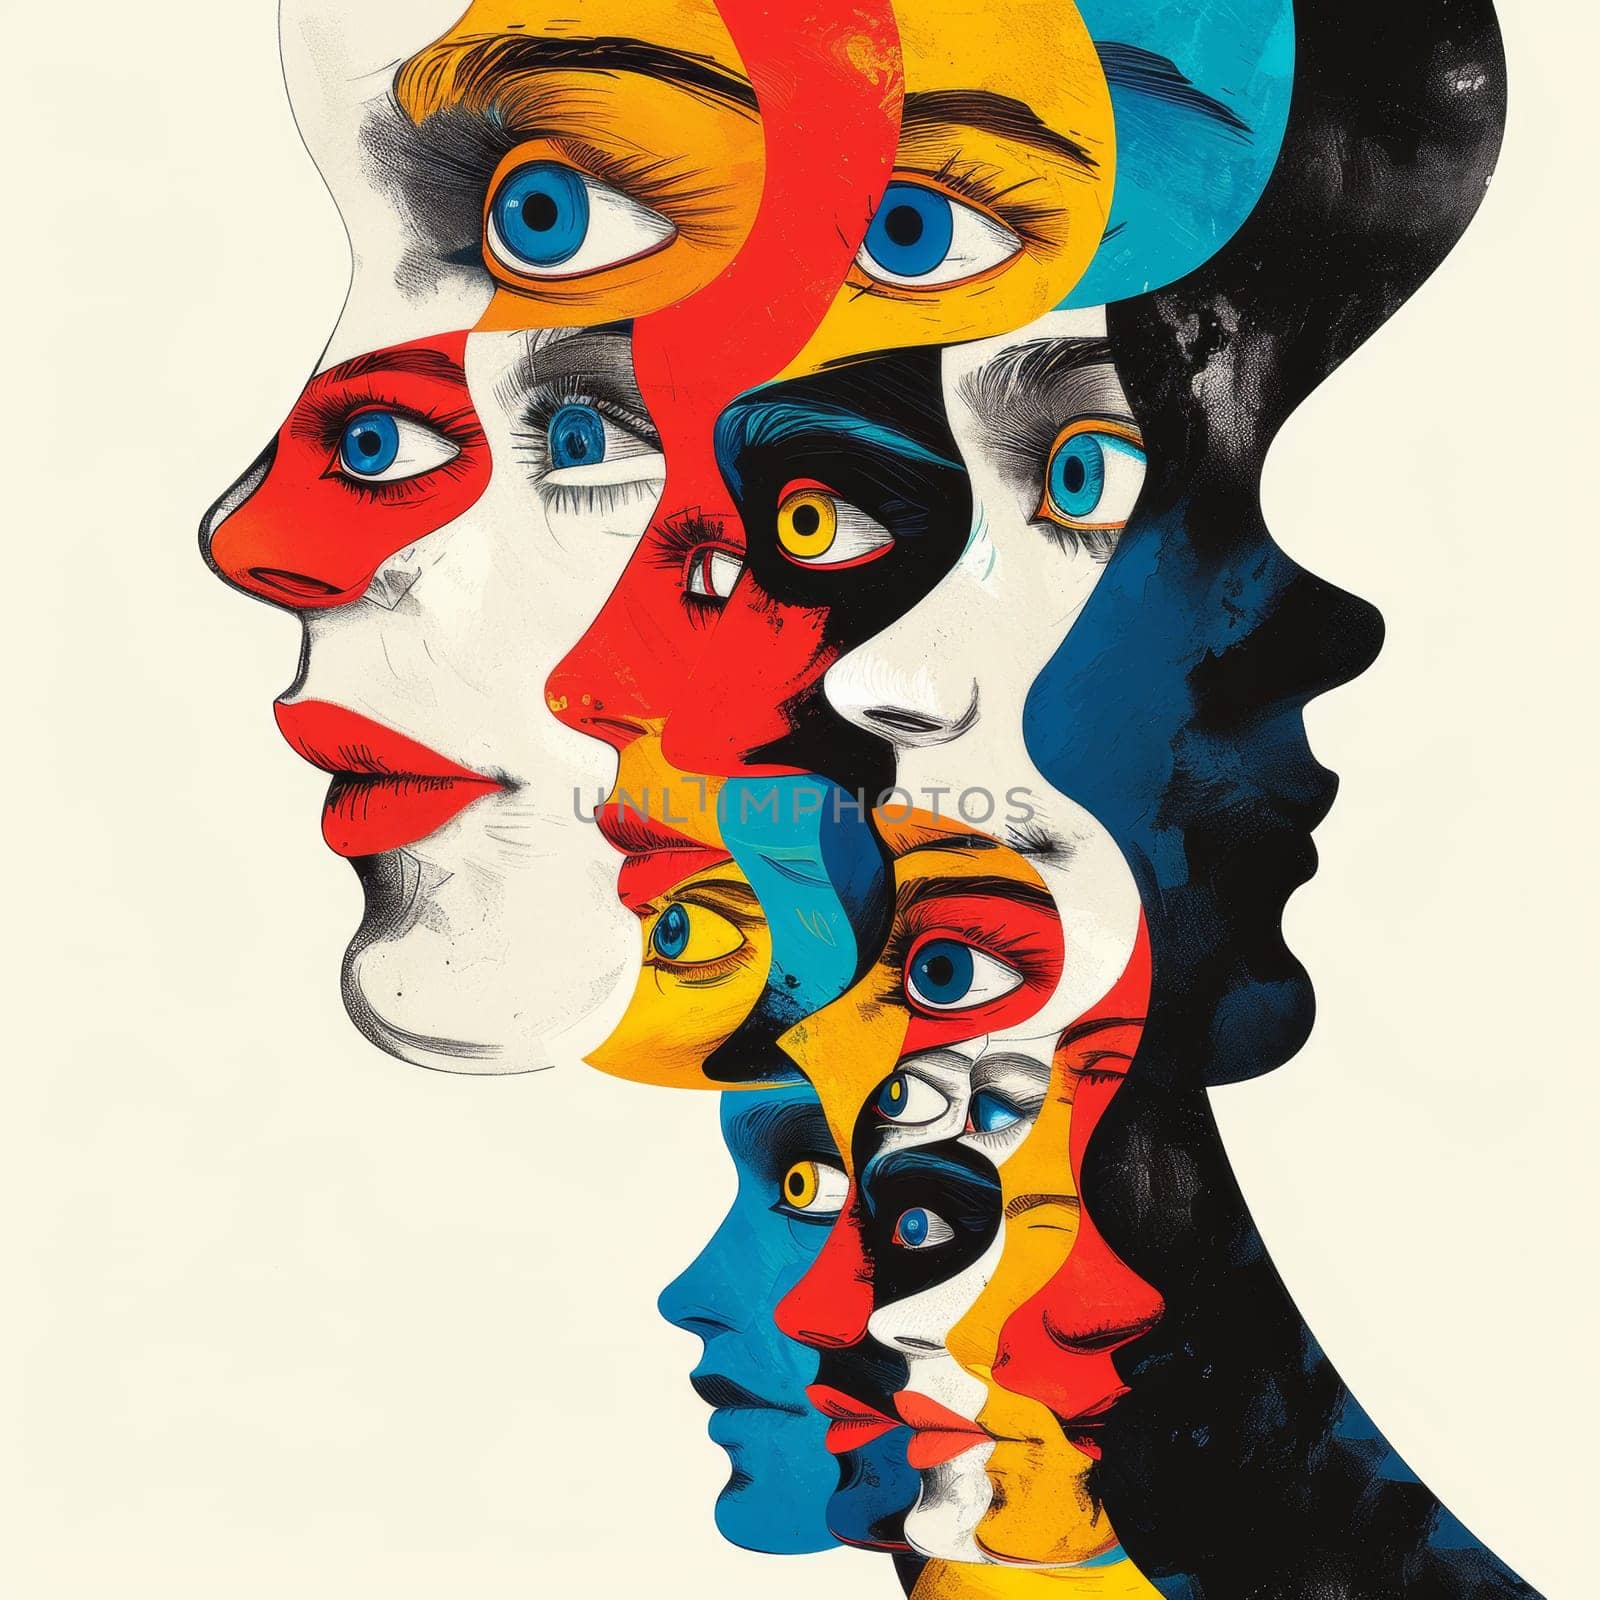 A colorful portrait of a woman with many faces and eyes